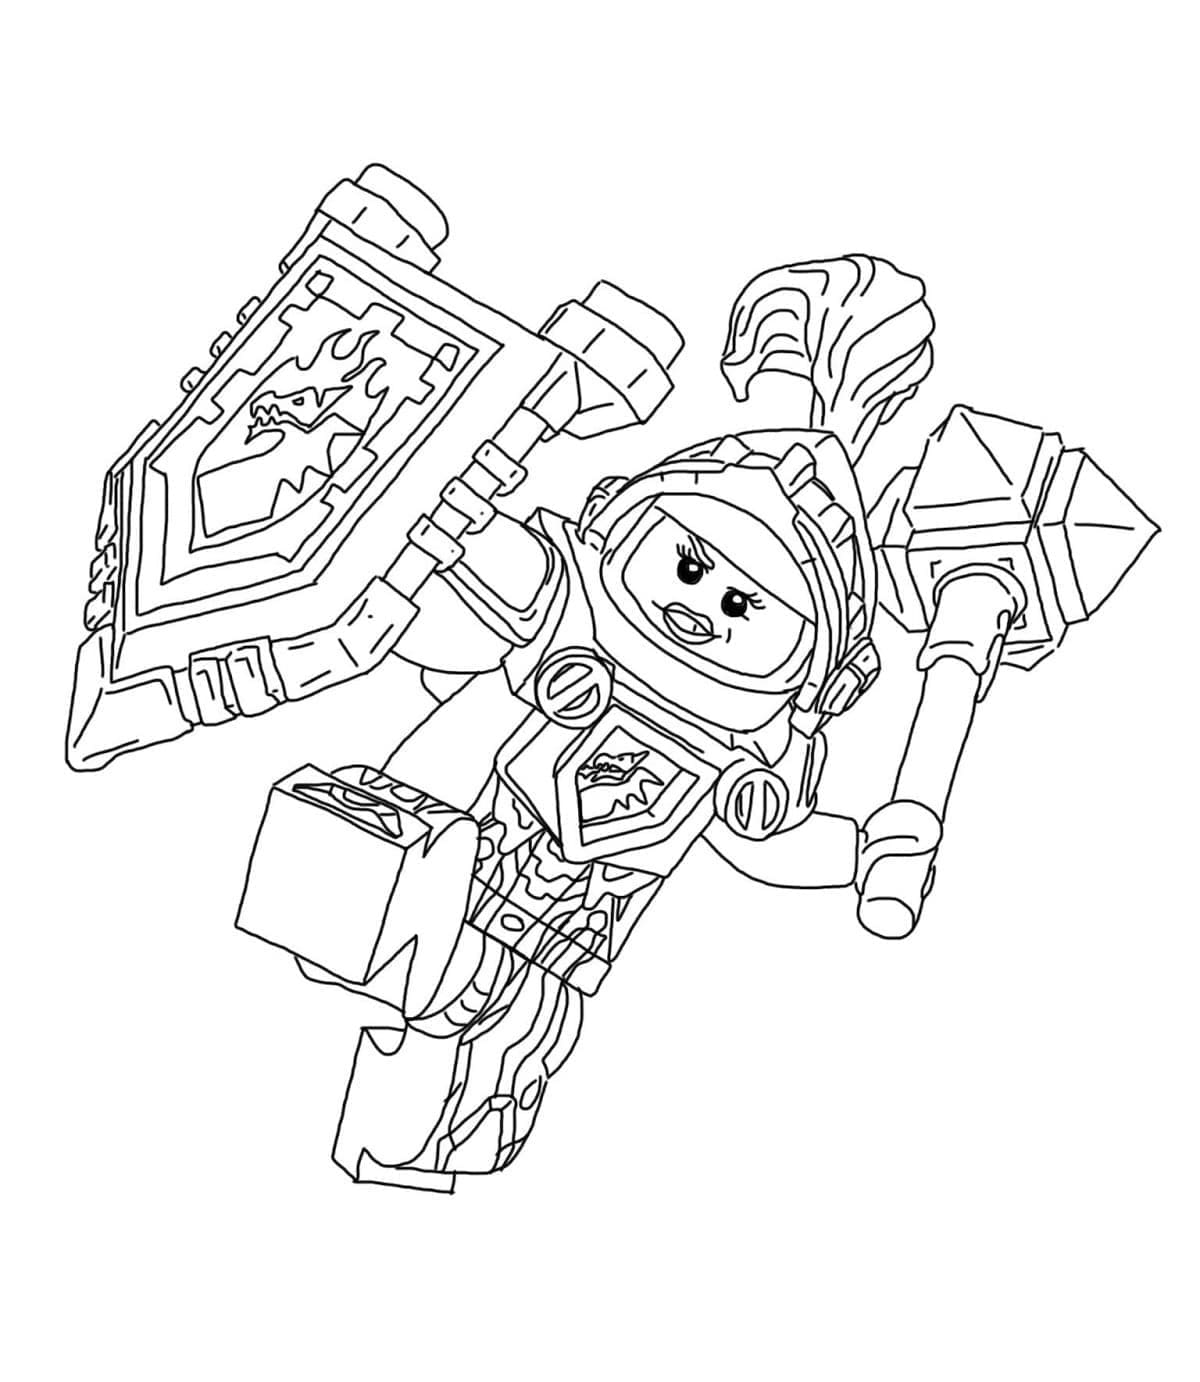 Lego Nexo Knights Pour Enfants coloring page